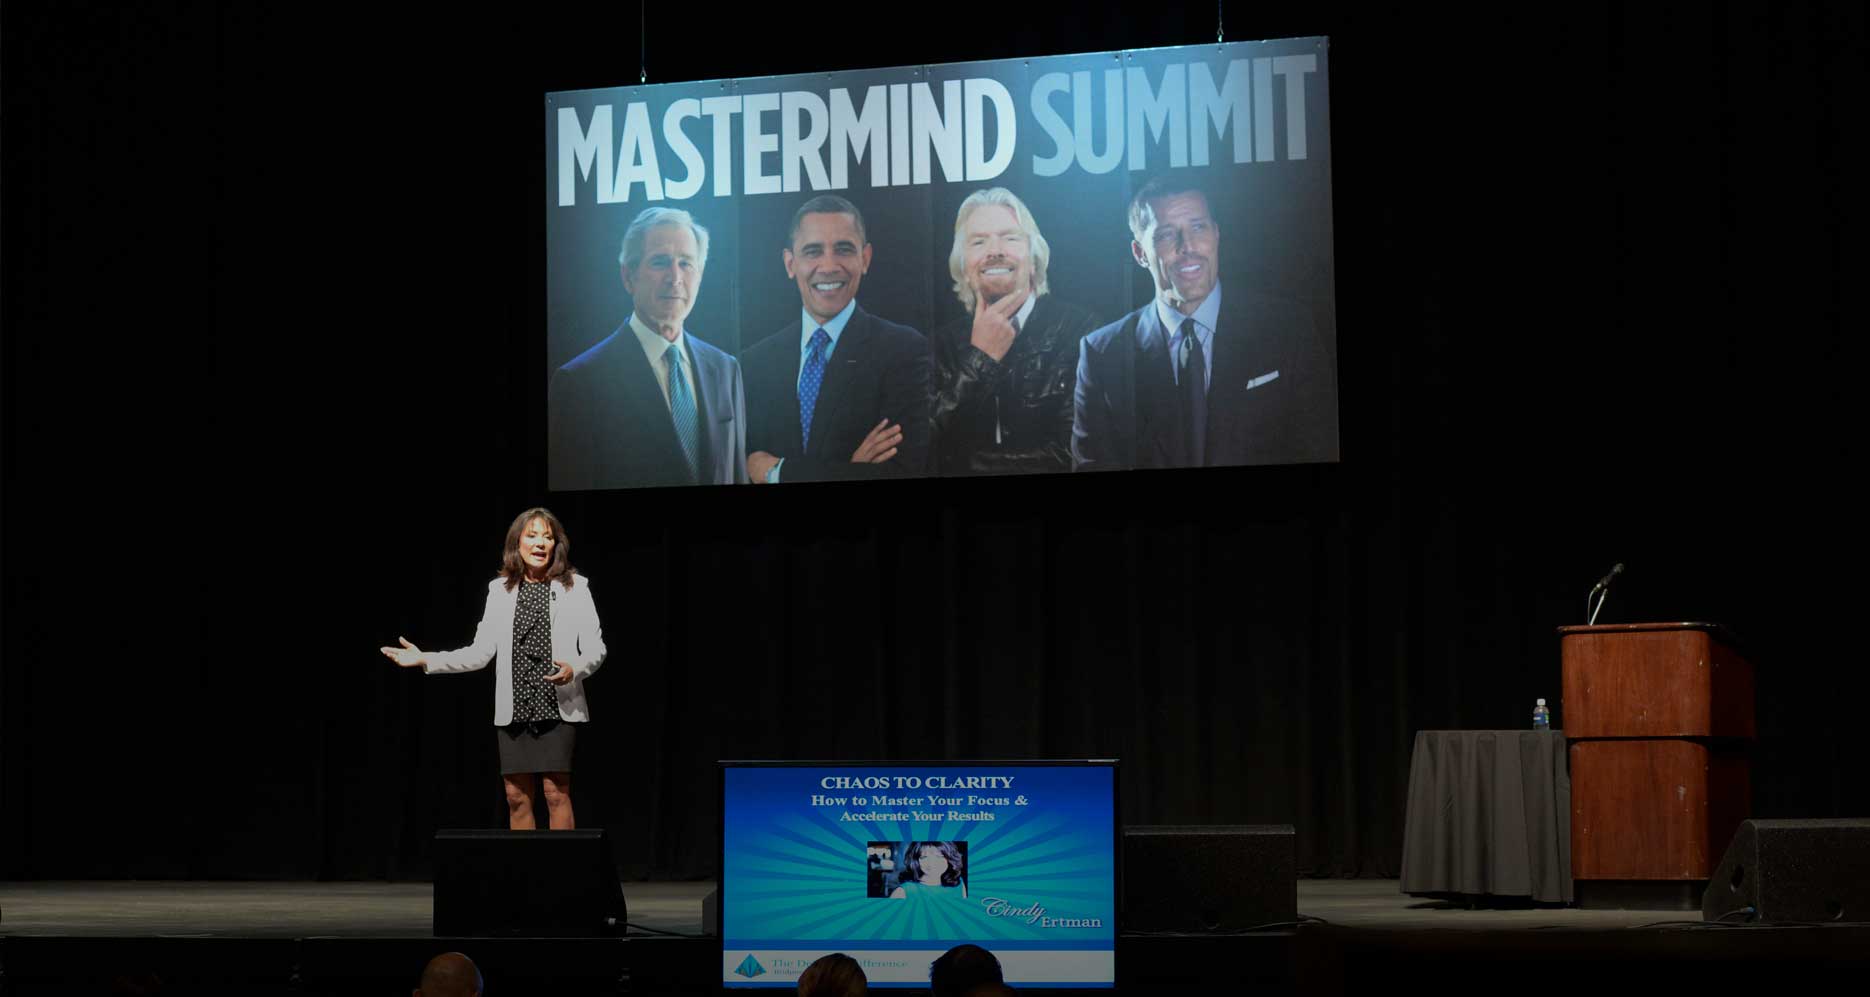 Cindy Ertman presenting about chaos and clarity on stage at a Mastermind Summit